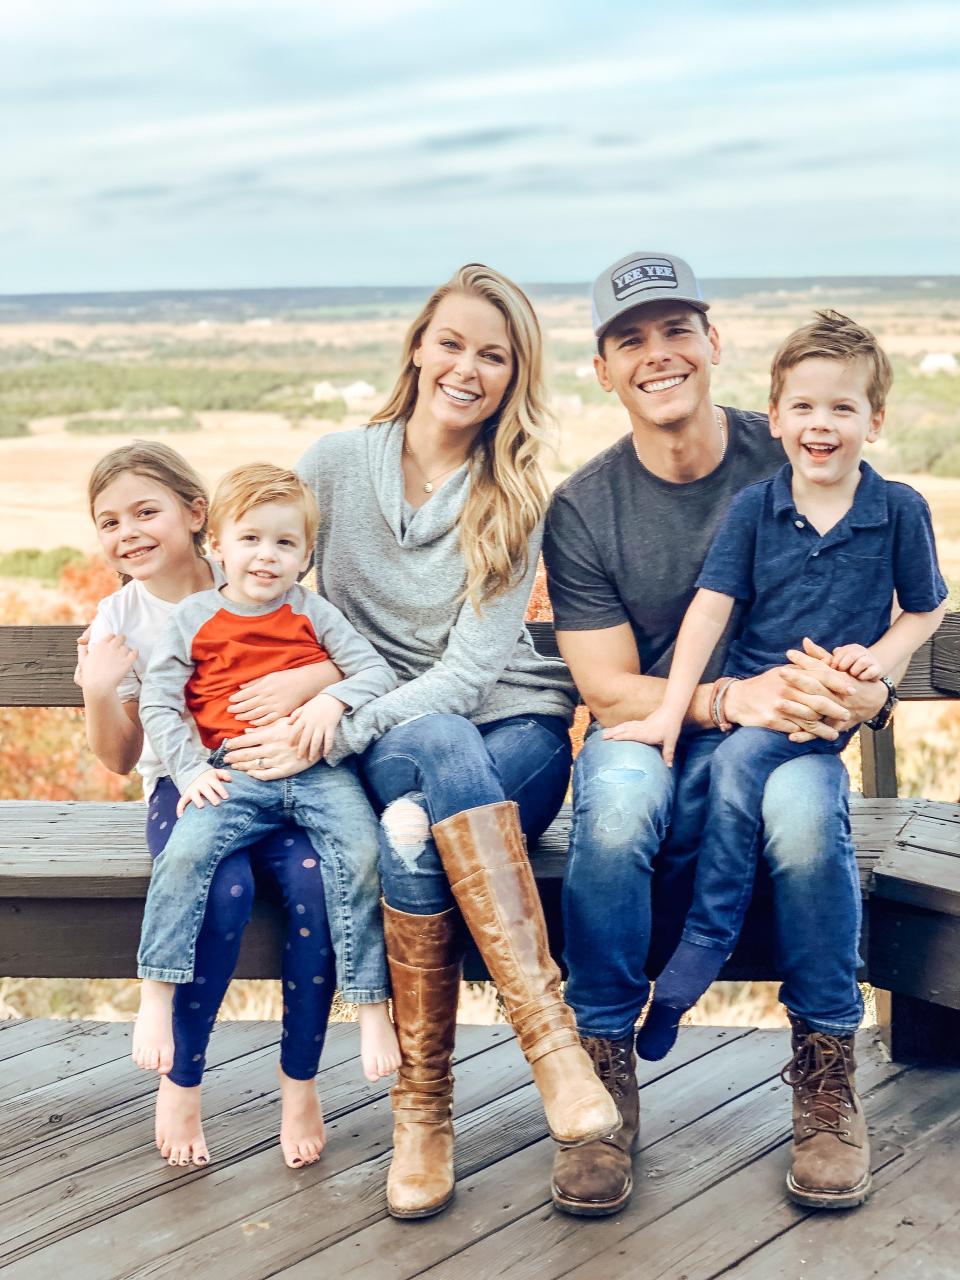 London Smith, River Smith, Amber Smith, Granger Smith and Lincoln Smith. In June 2019, 3-year-old River (left) died in a drowning accident at the family's home.